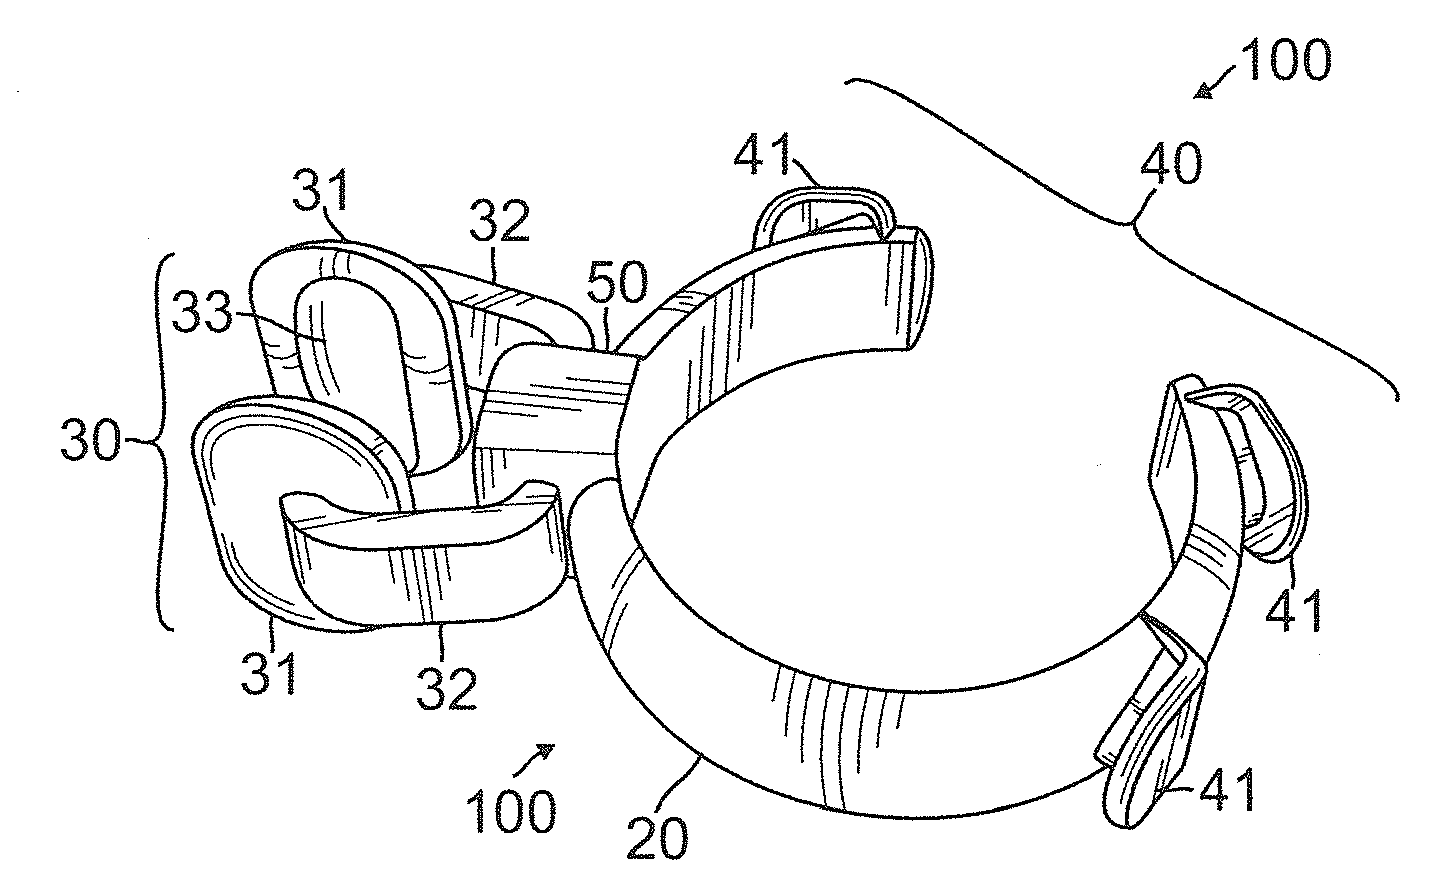 Lighter-holder for water pipe apparatus and methods